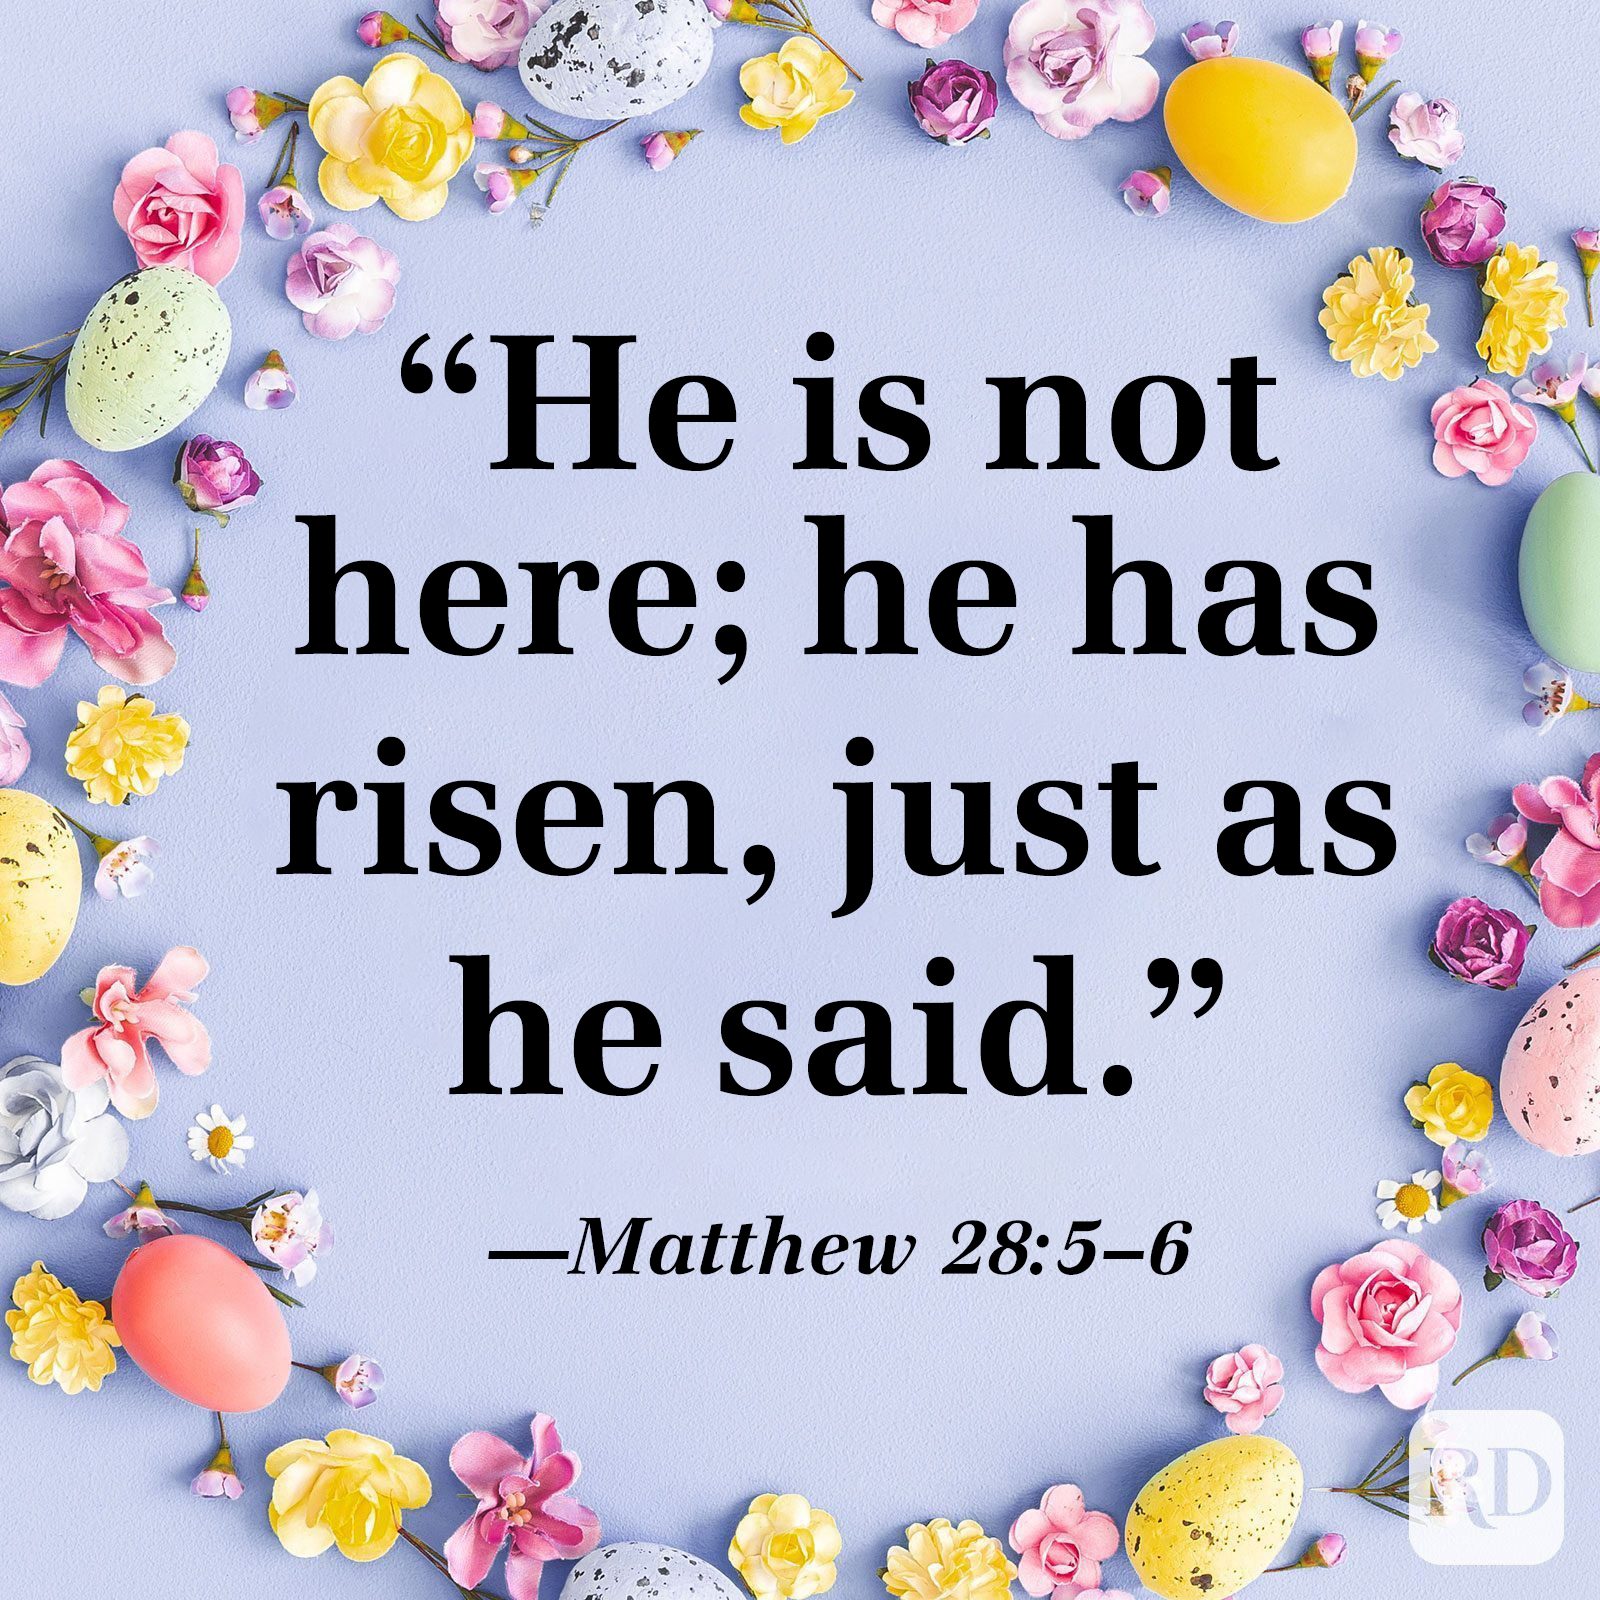 50 Best Easter Quotes to Share in 2023 — Happy Easter Quotes